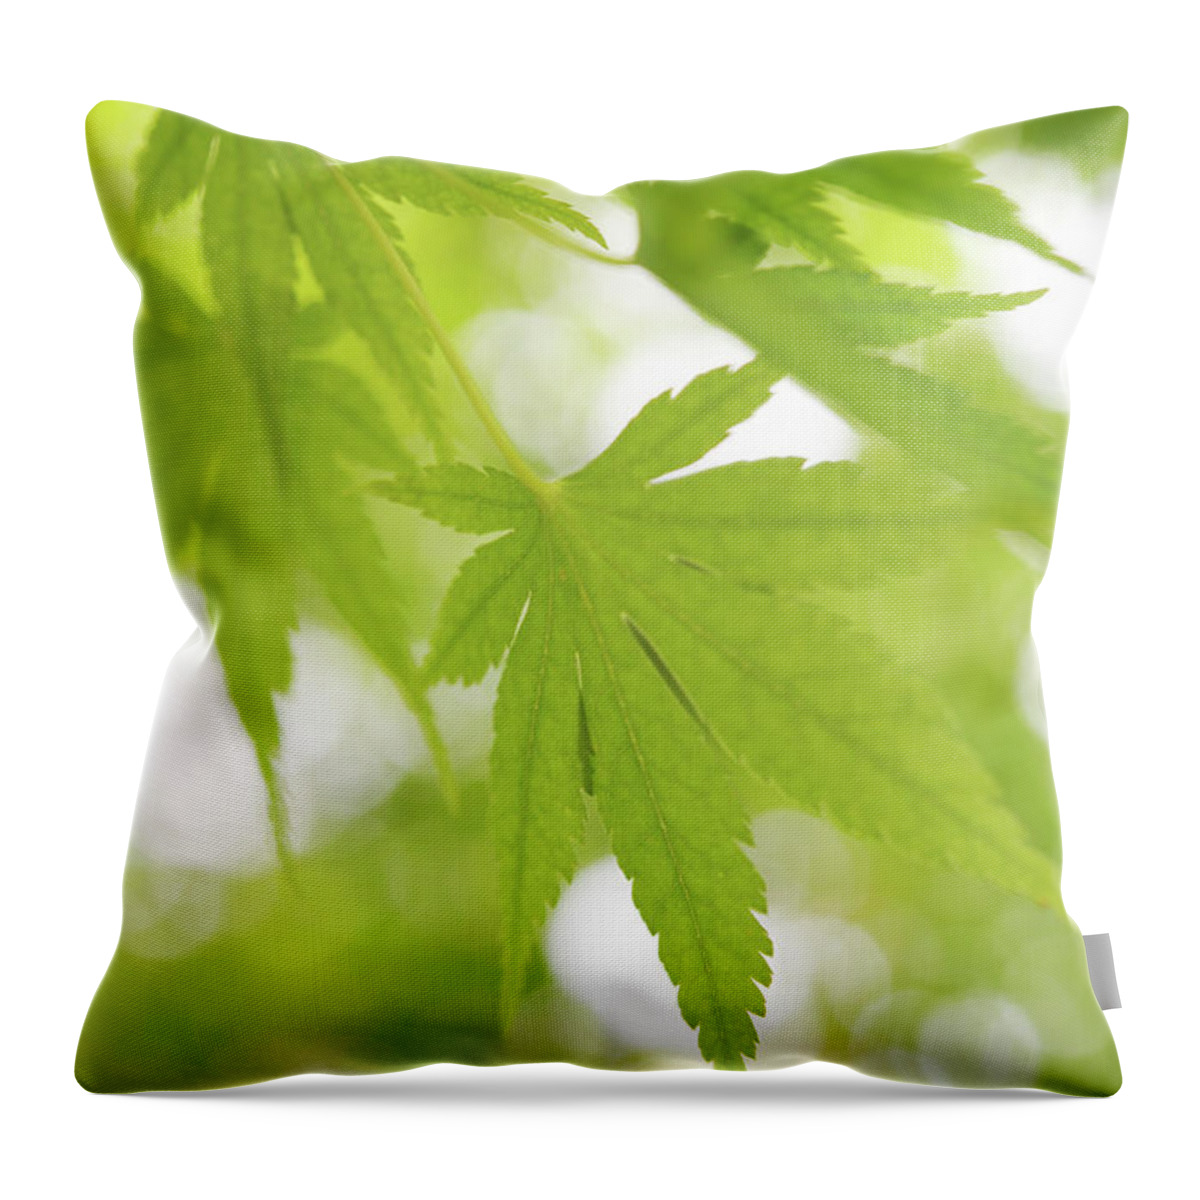 Jenny Rainbow Fine Art Photography Throw Pillow featuring the photograph Sunny Leaves Of Japanese Maple 3 by Jenny Rainbow